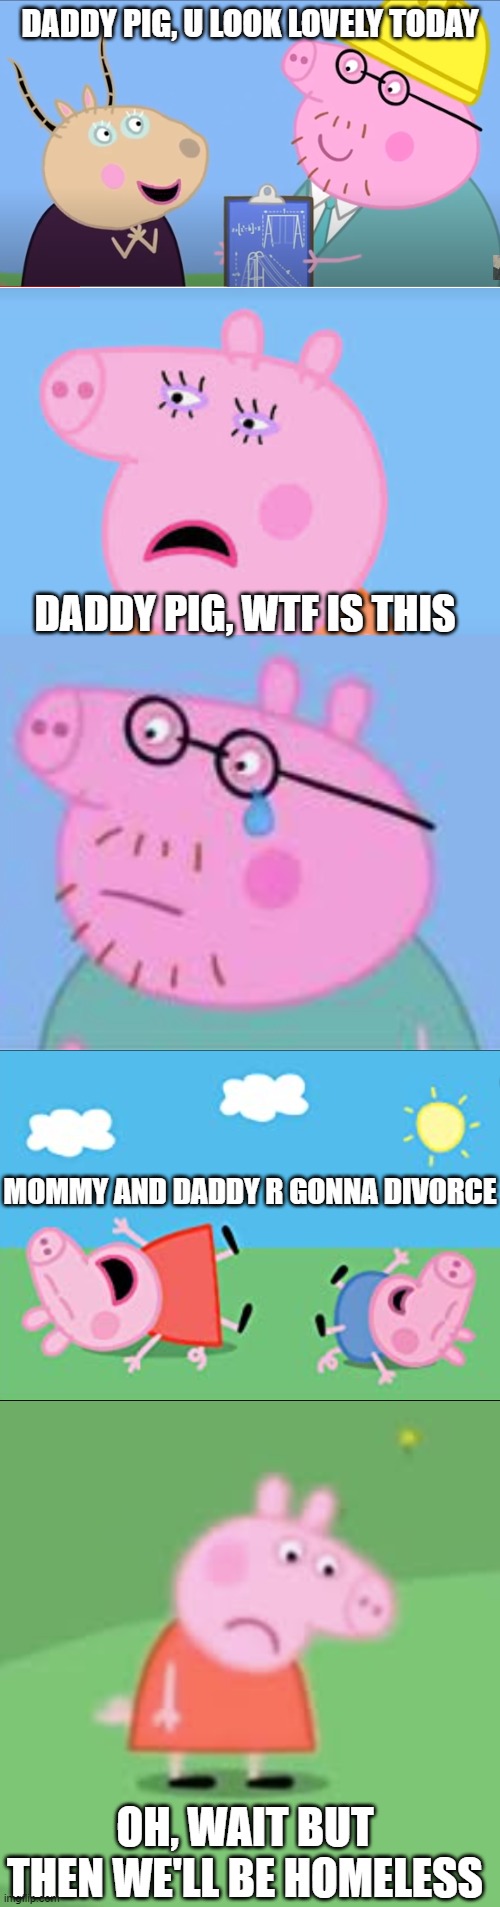 THE LONG PEPPA PIG MEME | DADDY PIG, U LOOK LOVELY TODAY; DADDY PIG, WTF IS THIS; MOMMY AND DADDY R GONNA DIVORCE; OH, WAIT BUT THEN WE'LL BE HOMELESS | image tagged in peppa pig,cheating husband | made w/ Imgflip meme maker